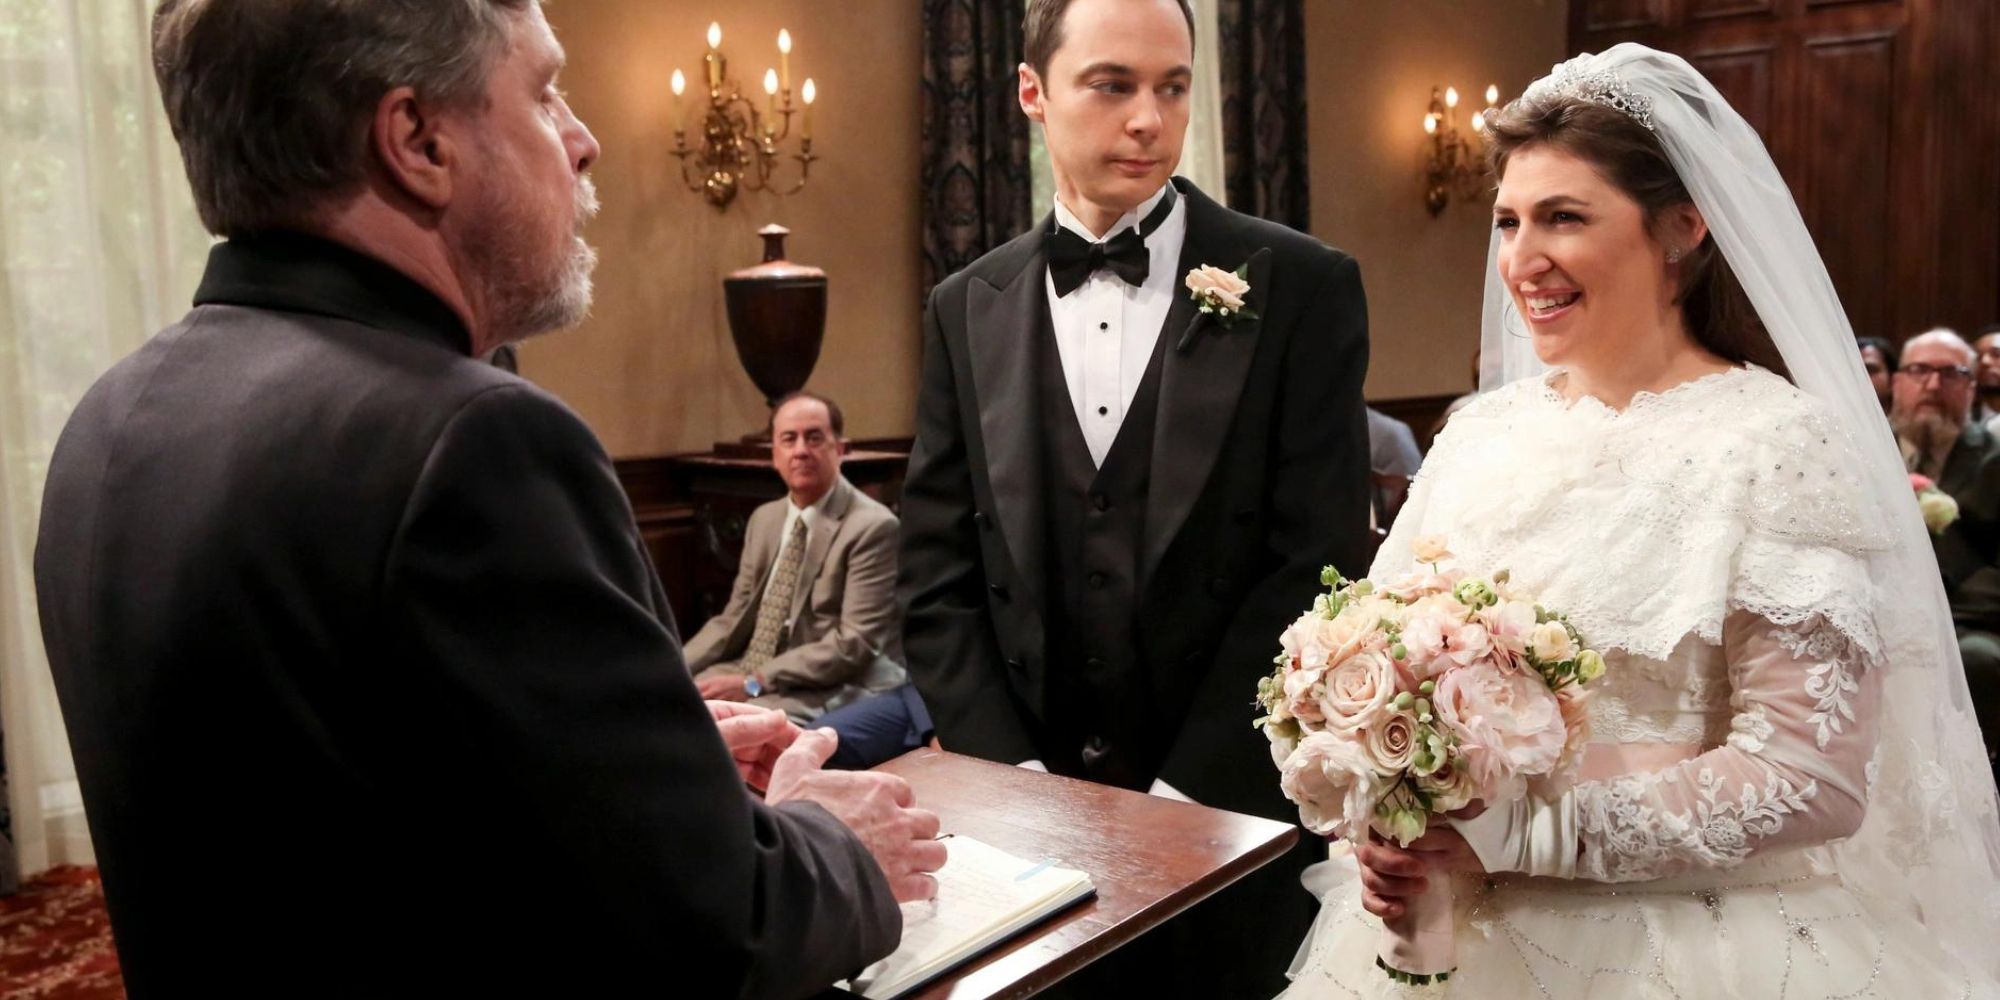 Jim Parsons and Mayim Bialik as Sheldon and Amy getting married by Mark Hamill in The Big Bang Theory.